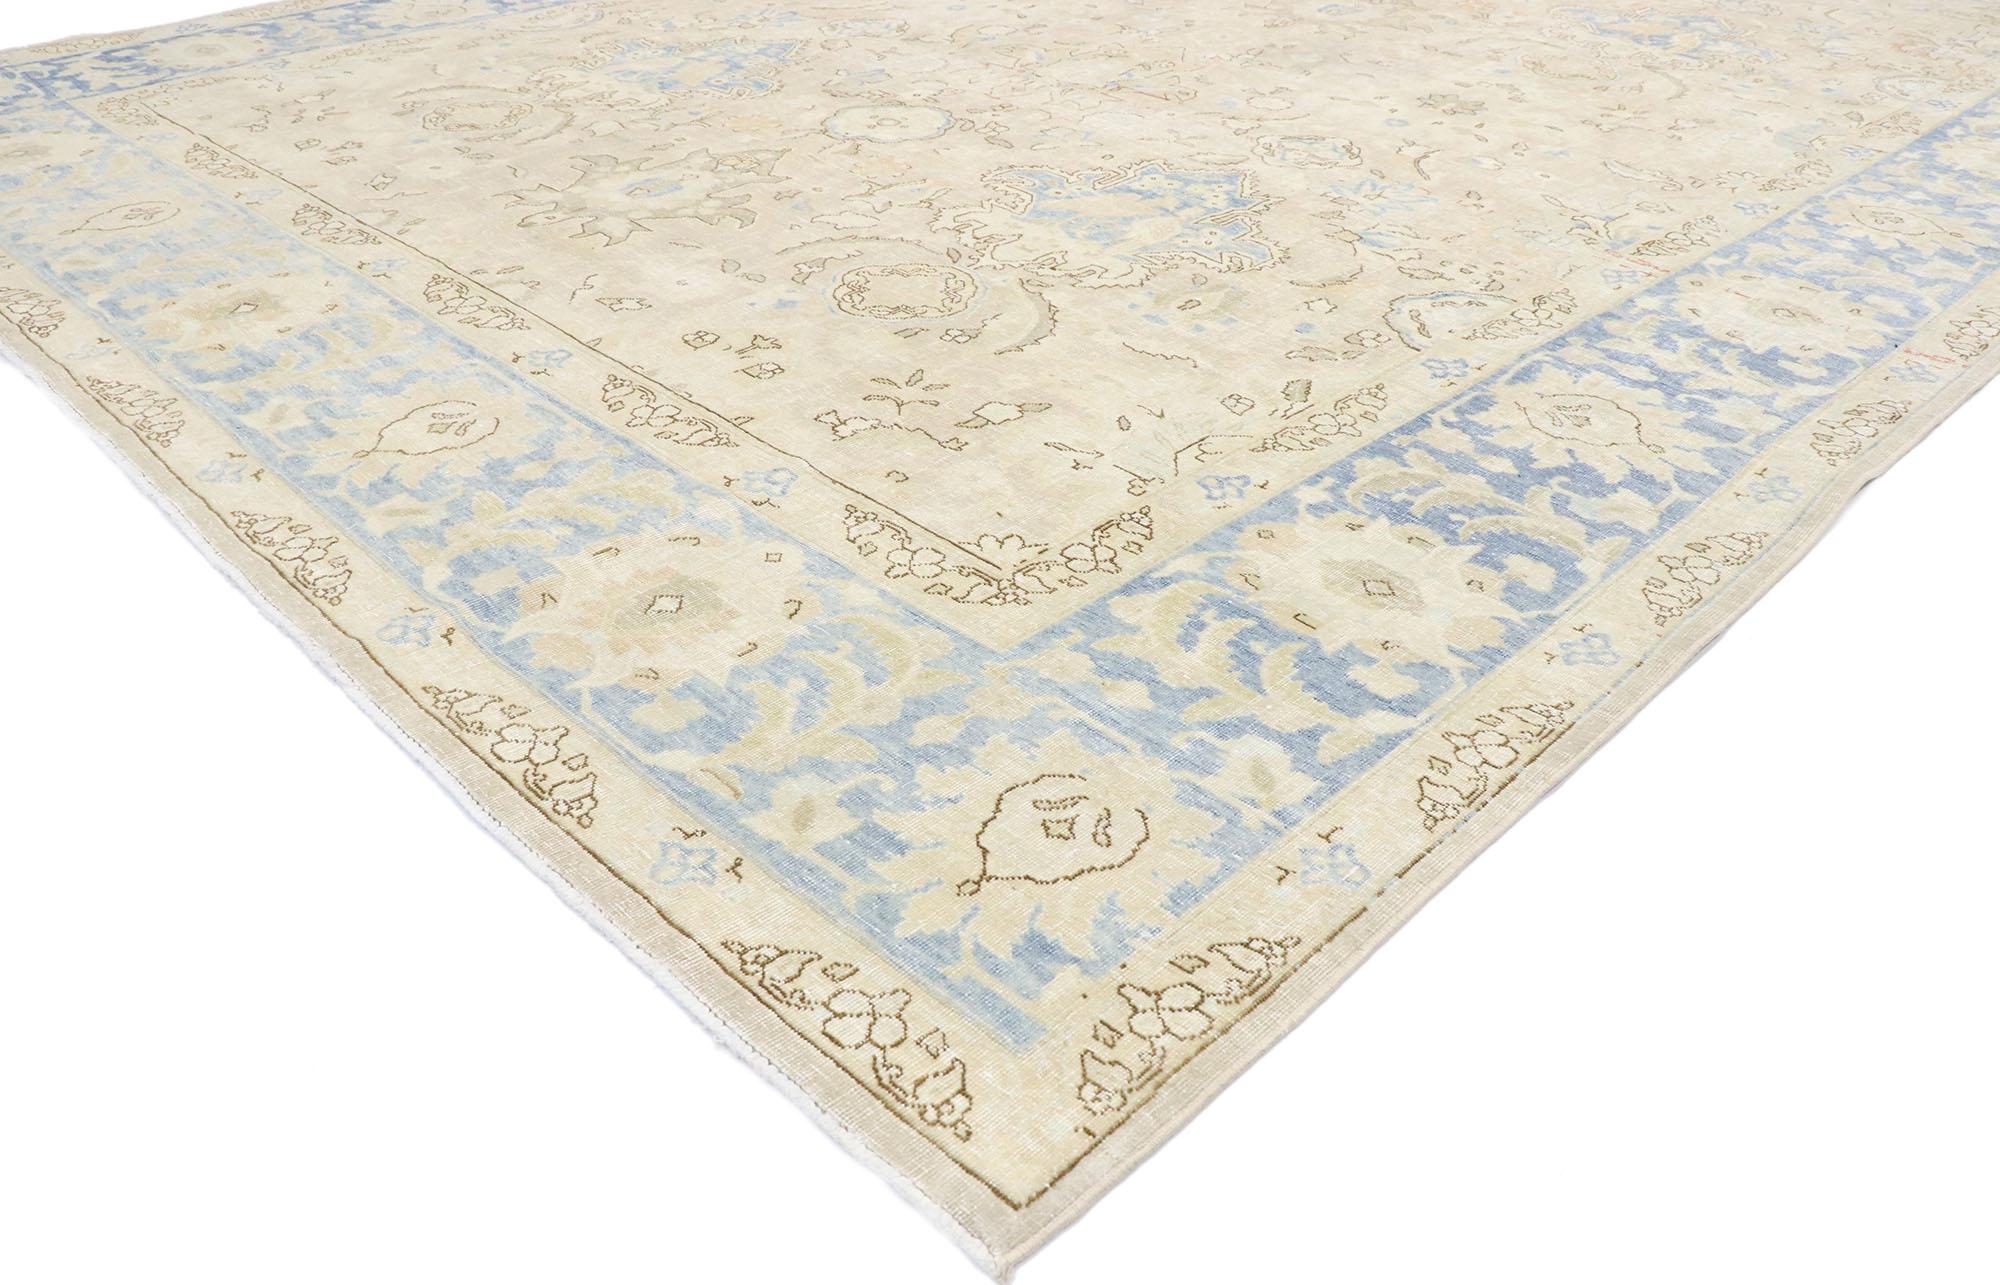 53465, vintage Persian Mashhad rug with transitional coastal style. Light and airy with coastal vibes, this hand-knotted wool vintage Persian Mashhad rug is poised to impress. The antique washed field features an all-over botanical pattern comprised